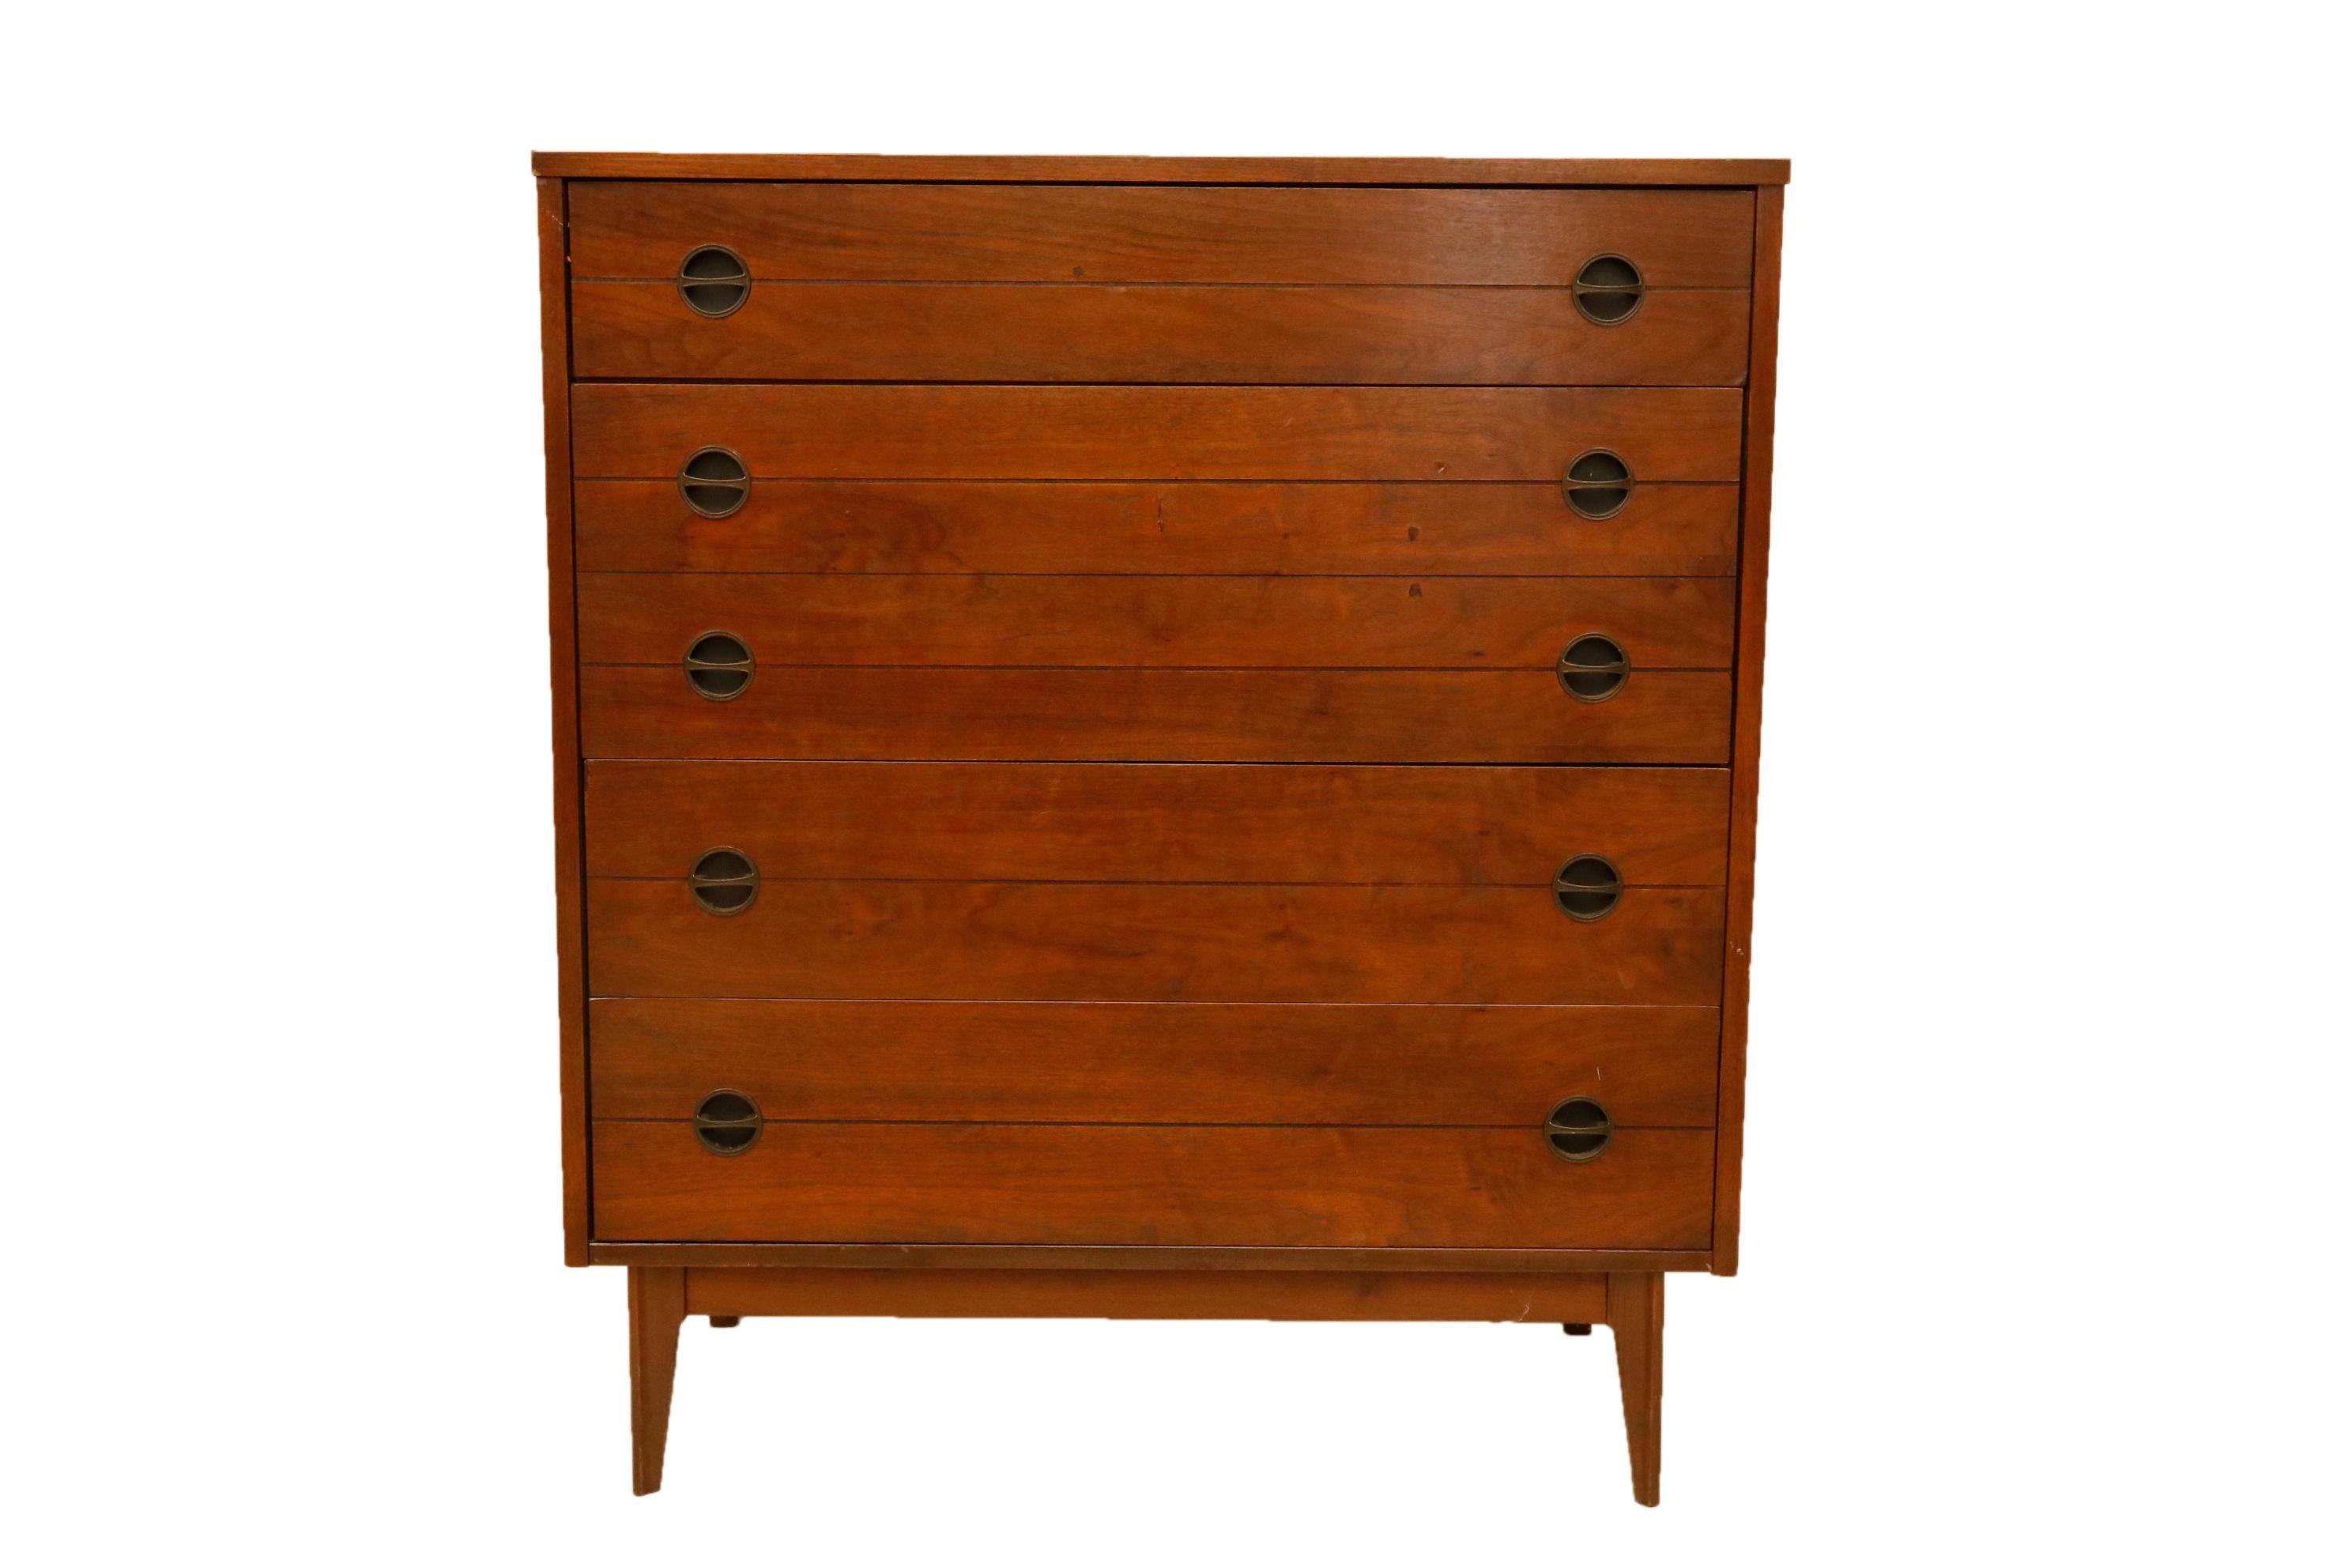 American Mid-Century Modern. Four-drawer chest with black recessed pulls: Hardware.